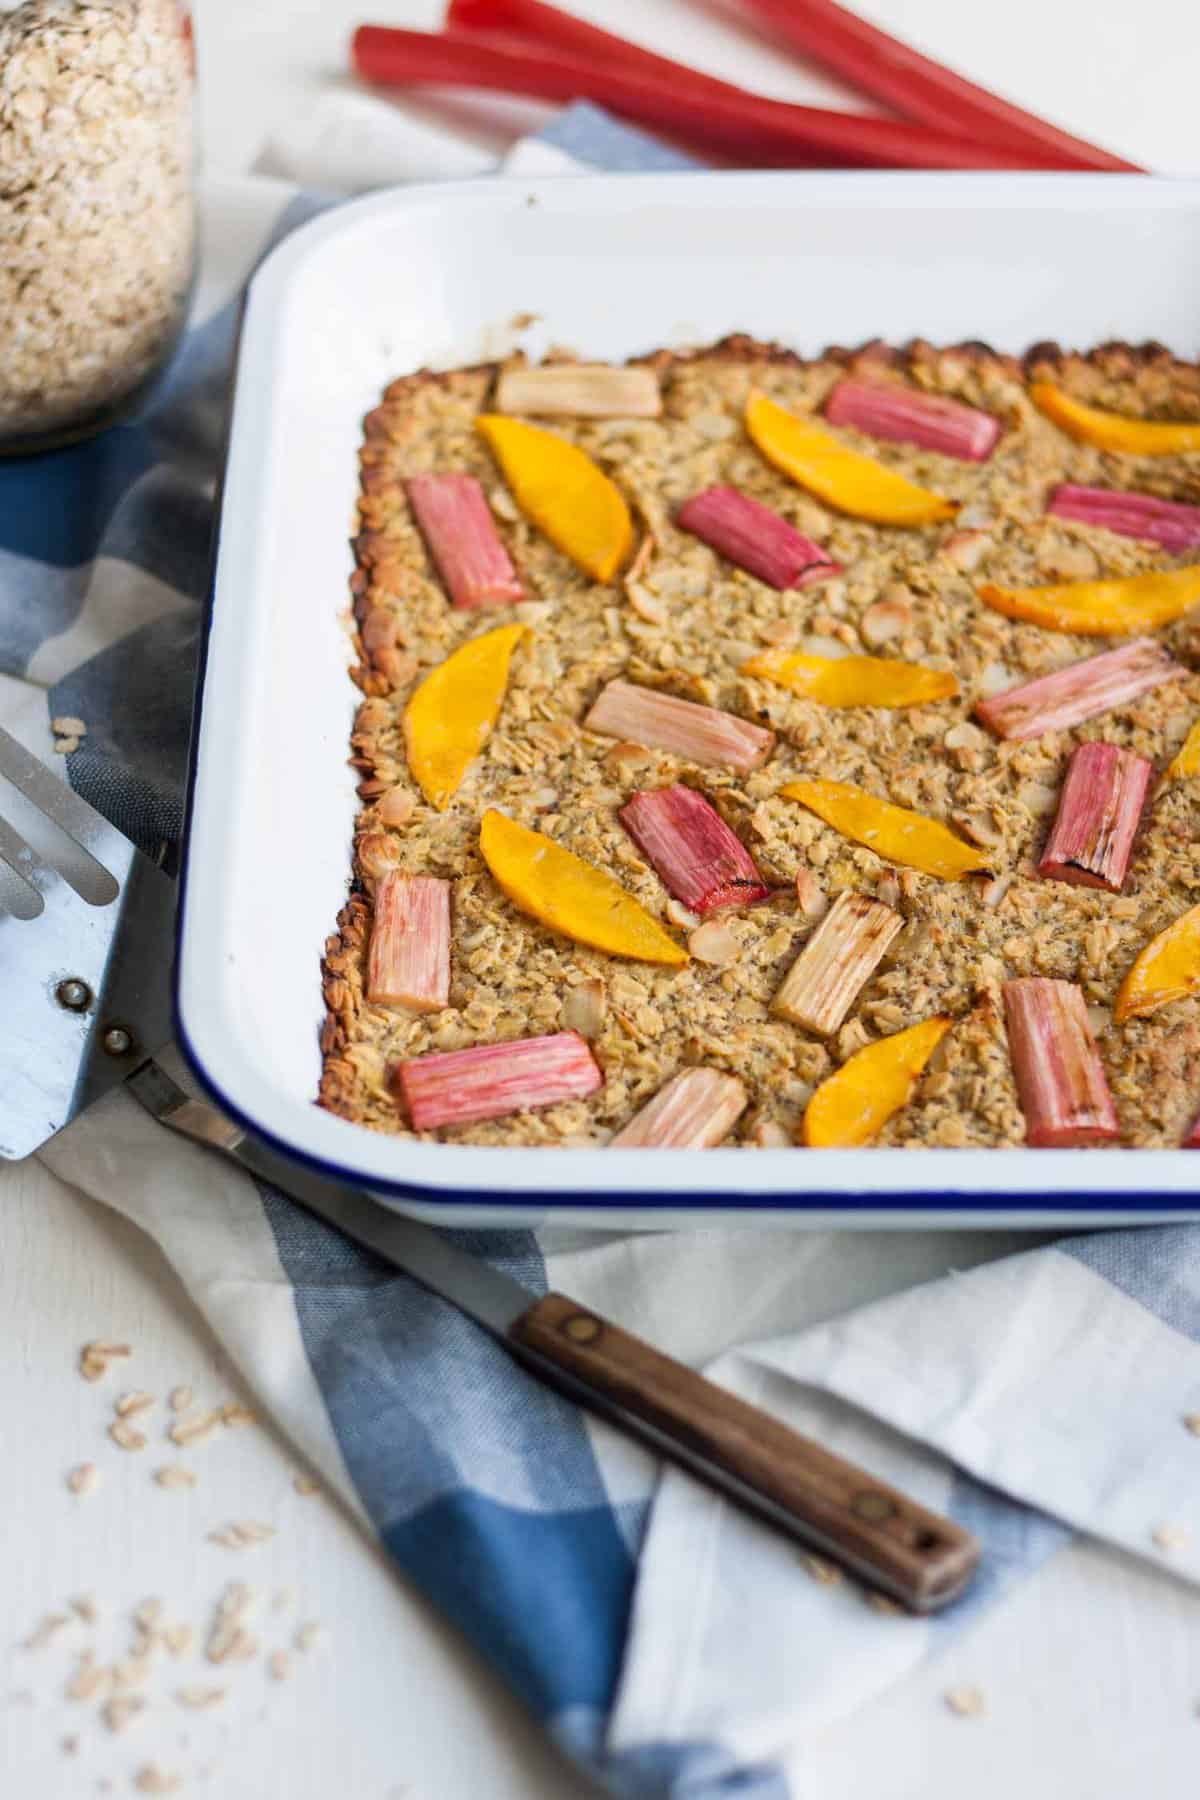 Rhubarb and Mango Baked Oatmeal - this naturally sweetened vegan breakfast dish is bright and fruity and will keep you full until lunchtime! | eatloveeats.com